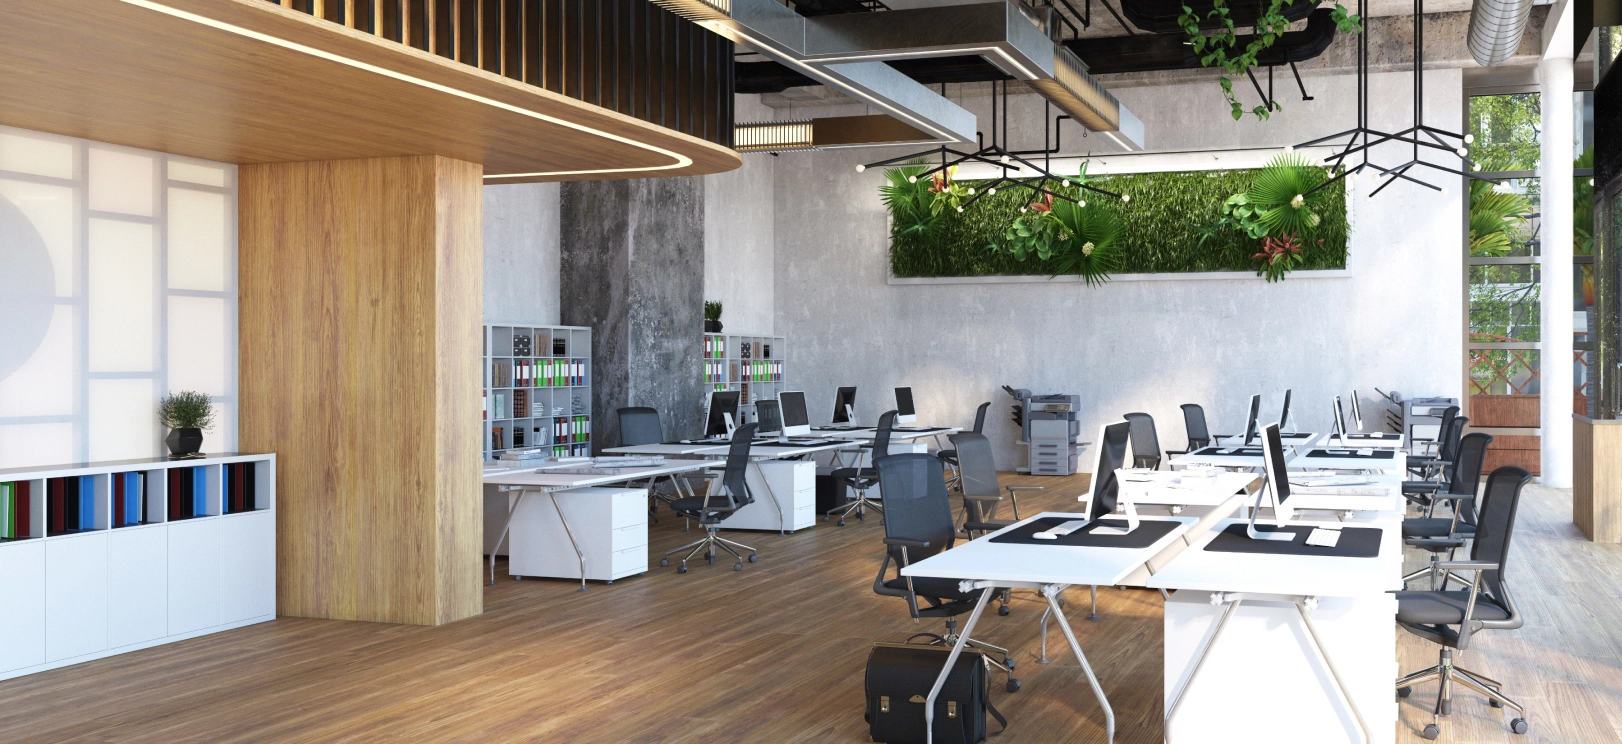 How Offices are Rearchitecting Their Spaces For Post-COVID